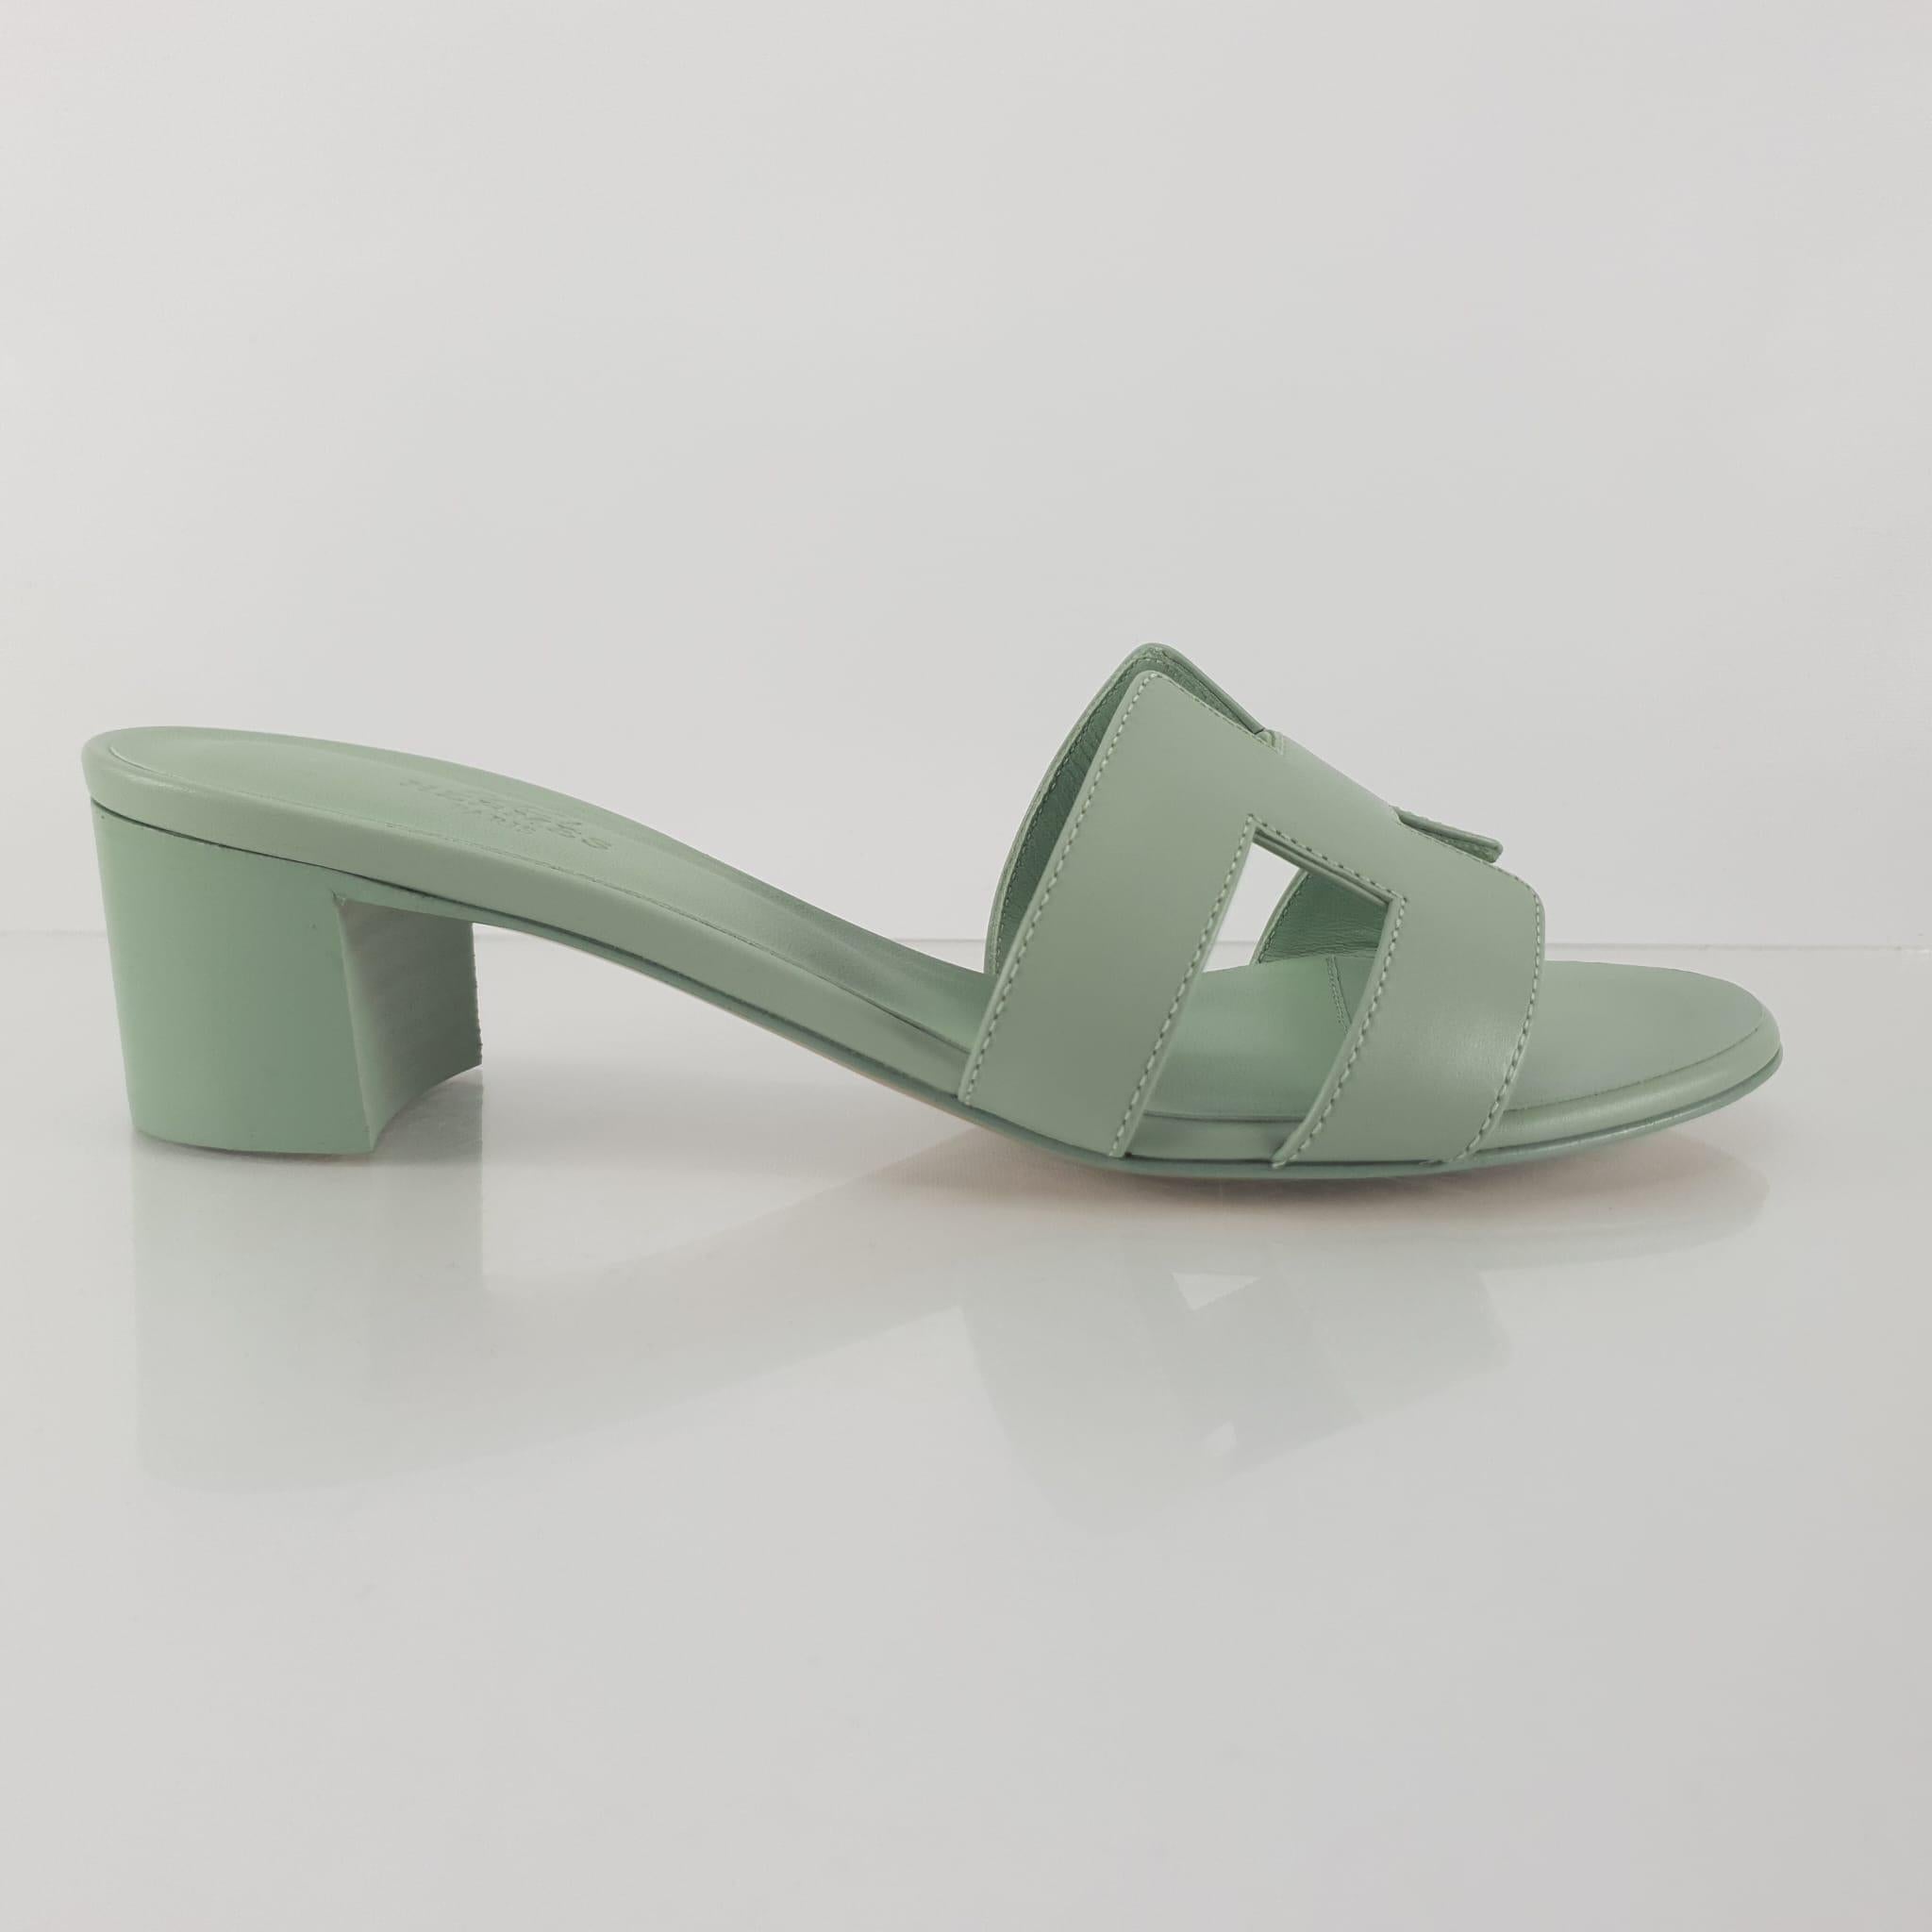 Hermes Vert D'eau Calfskin Size 37 Oasis sandal In New Condition For Sale In Nicosia, CY